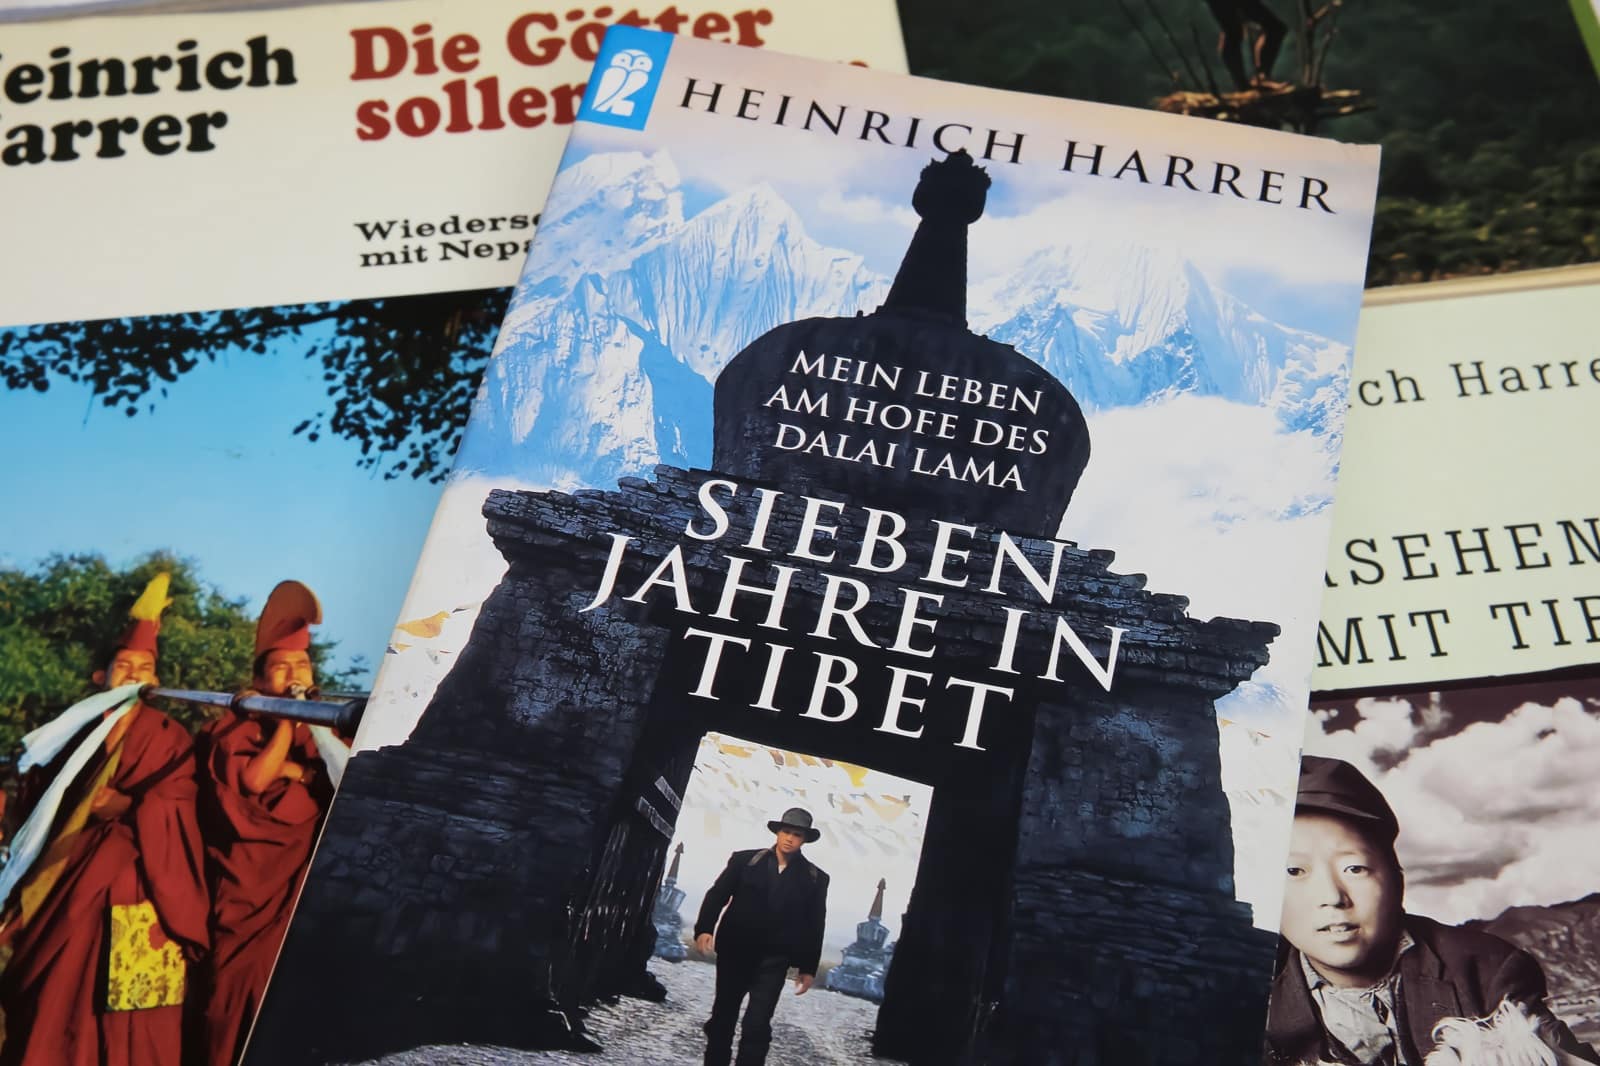 <p><span>“Seven Years in Tibet” by Heinrich Harrer is an extraordinary true story of adventure and enlightenment. Harrer, an Austrian mountaineer, escapes from a British internment camp in India during World War II and makes his way to Tibet, where he becomes a tutor and friend to the young Dalai Lama.</span></p> <p><span>The book offers a fascinating glimpse into life in Tibet before the Chinese occupation, with vivid descriptions of its culture, religion, and the stunning Himalayan landscape. </span></p> <p><b>Insider’s Tip: </b><span>Consider researching the current political situation in Tibet as you read to better understand the historical context of Harrer’s journey.</span></p>